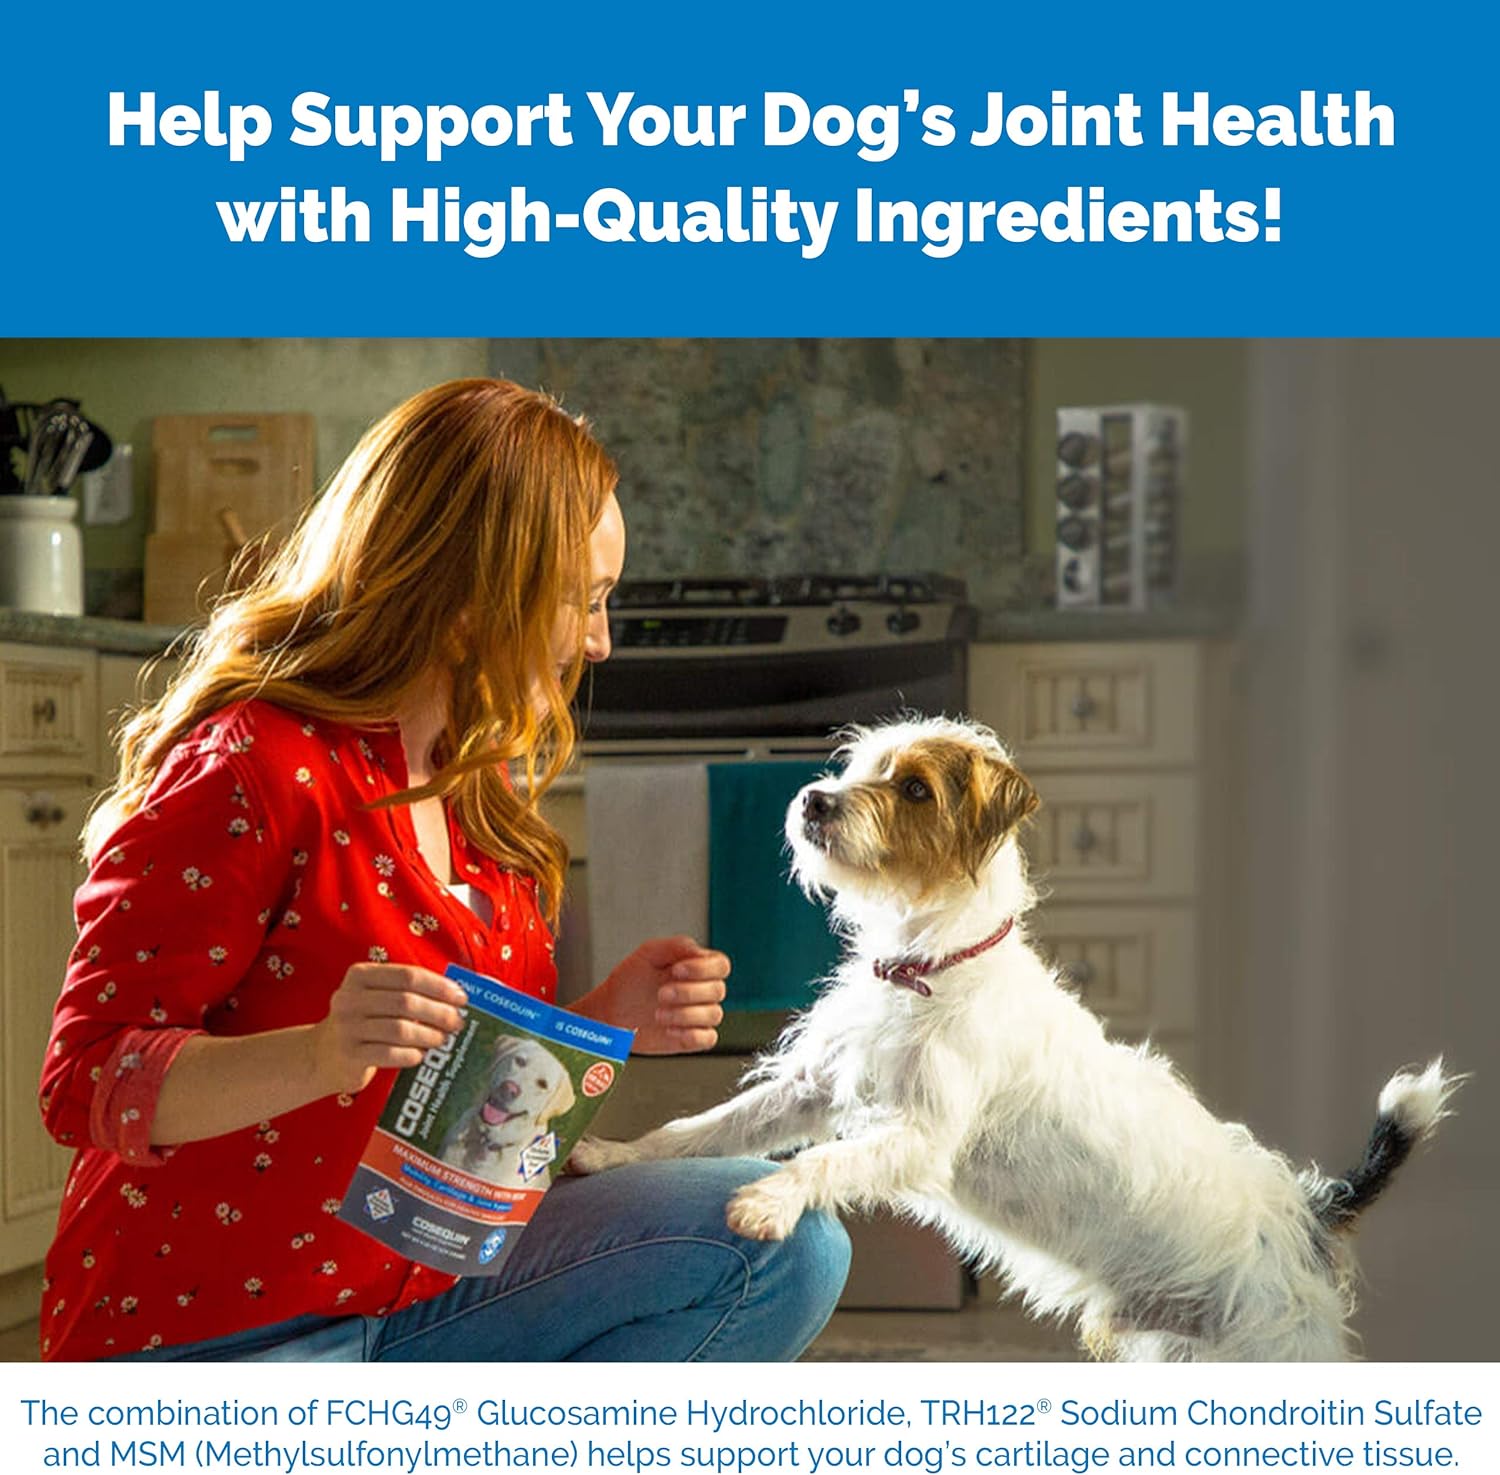 Cosequin Senior Joint Health Supplement for Senior Dogs - With Glucosamine, Chondroitin, Omega-3 for Skin and Coat Health and Beta Glucans for Immune Support, 60 Soft Chews : Pet Supplies